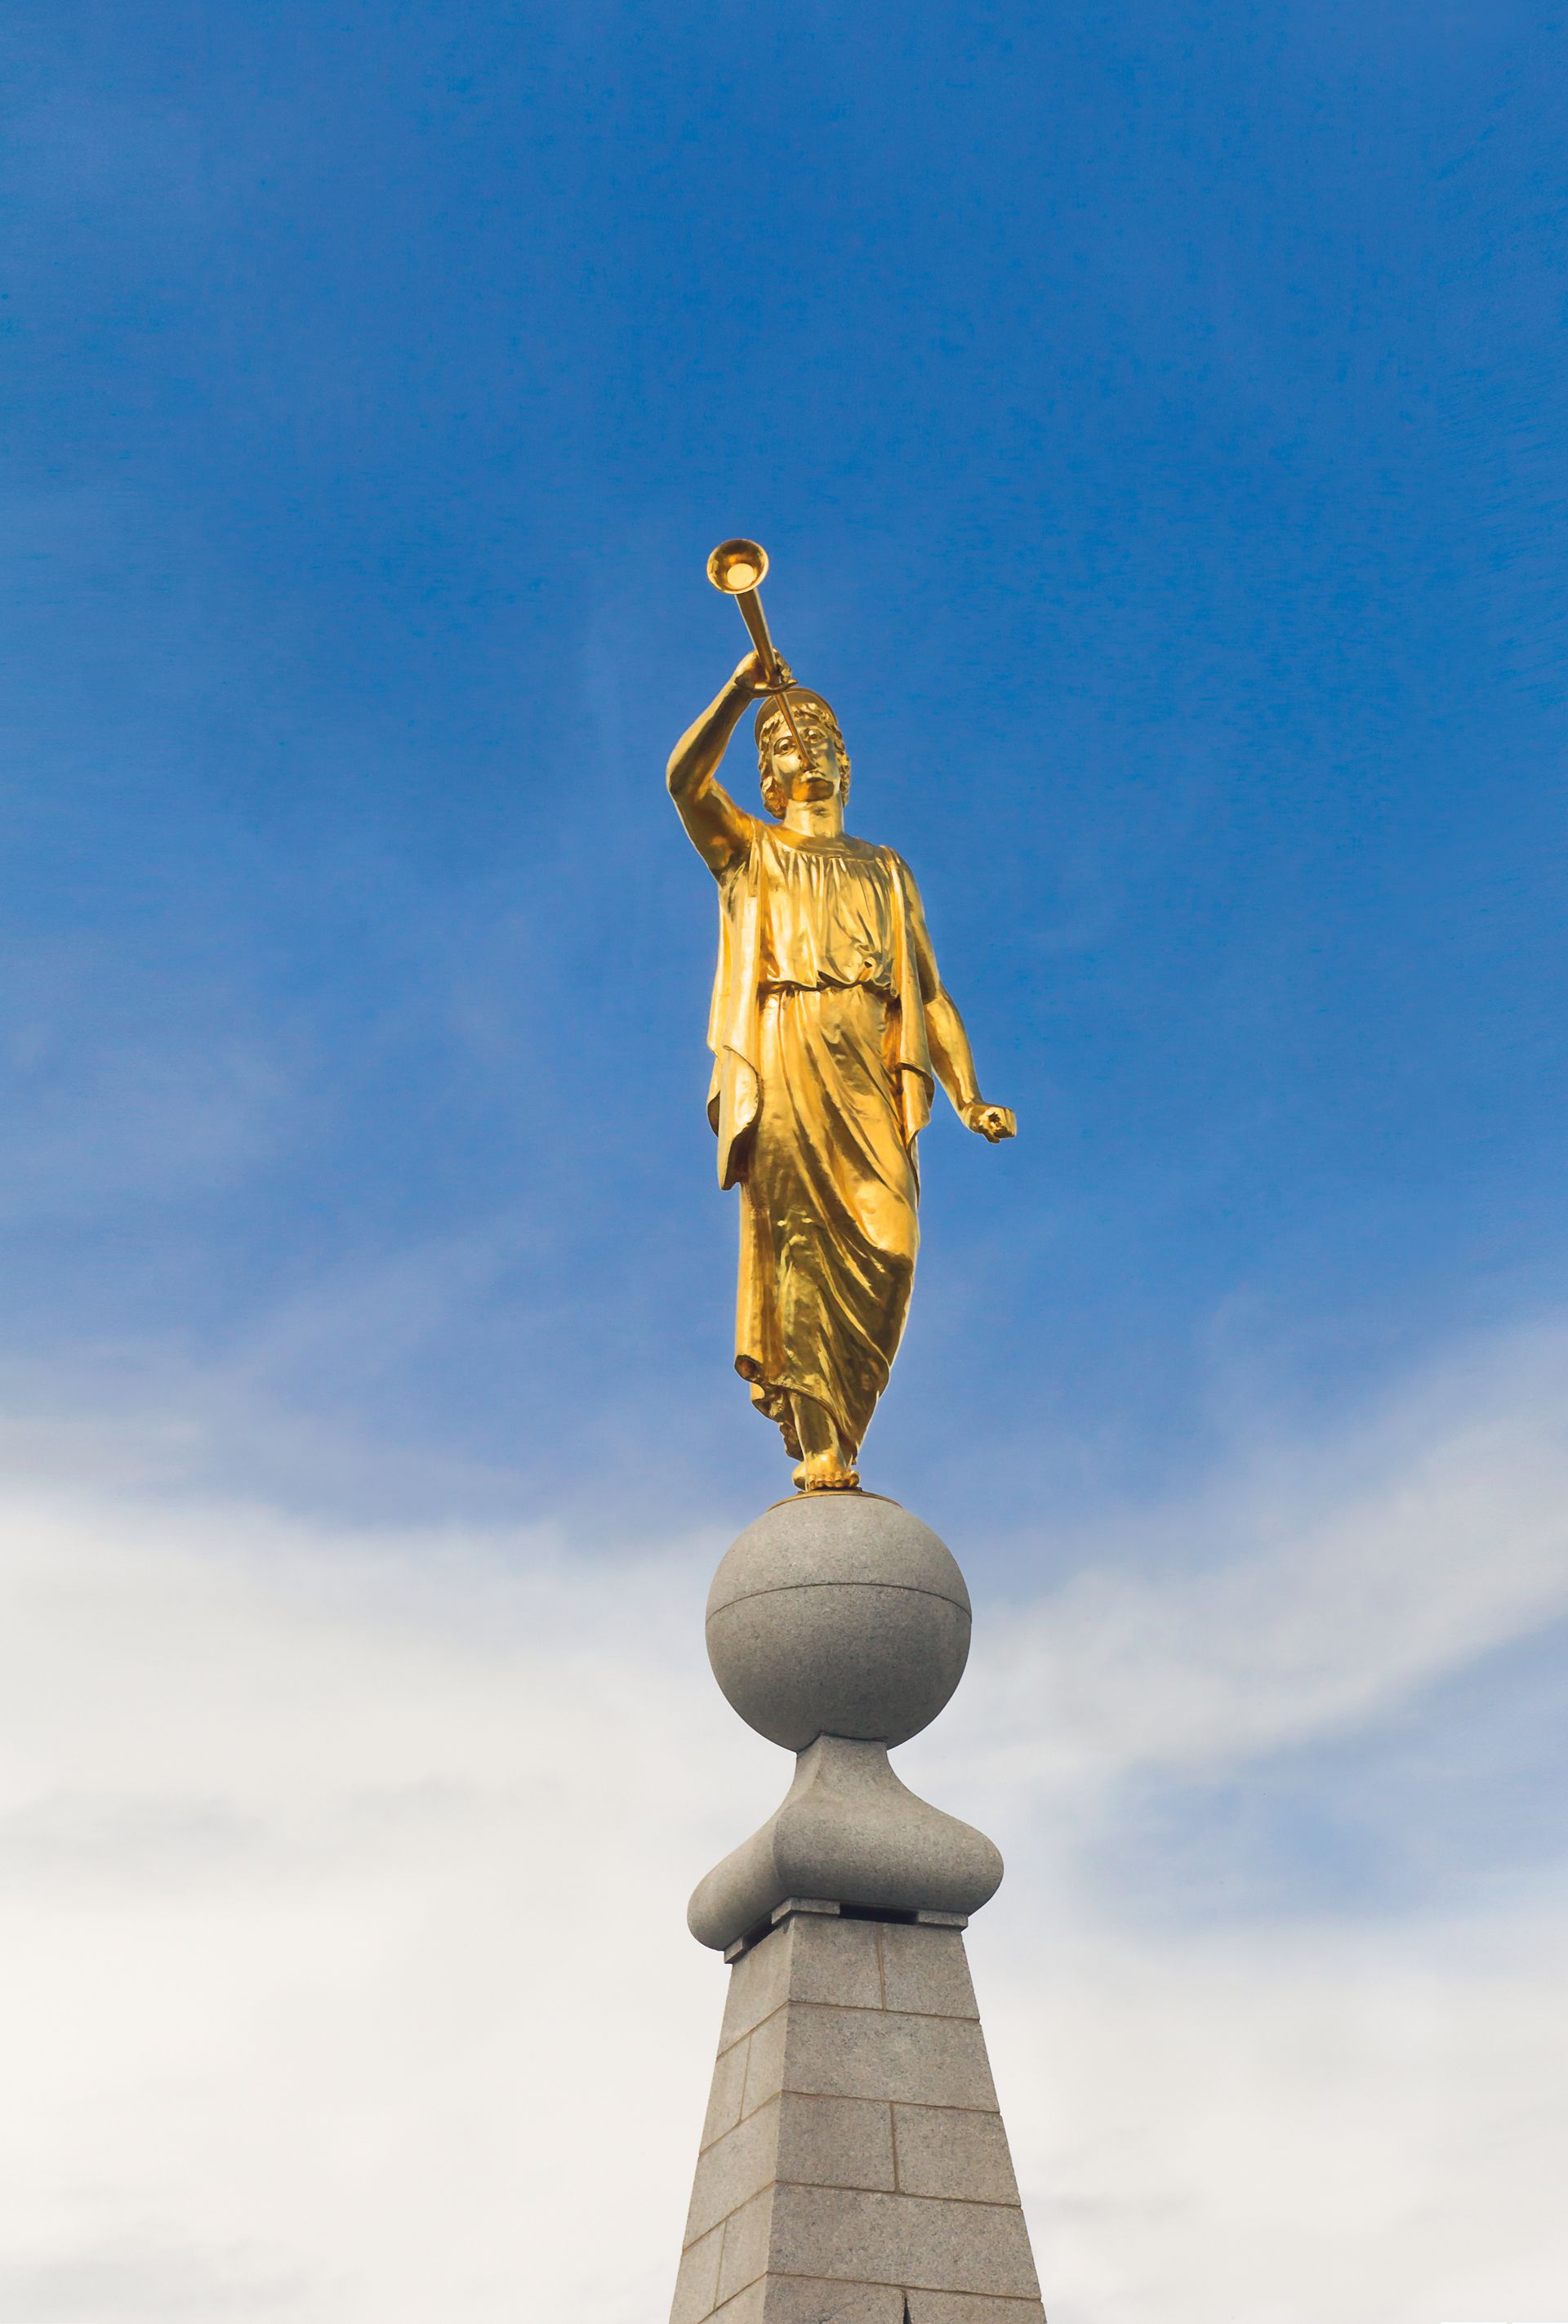 A photograph of the angel Moroni atop the Salt Lake Temple on a partly cloudy day.